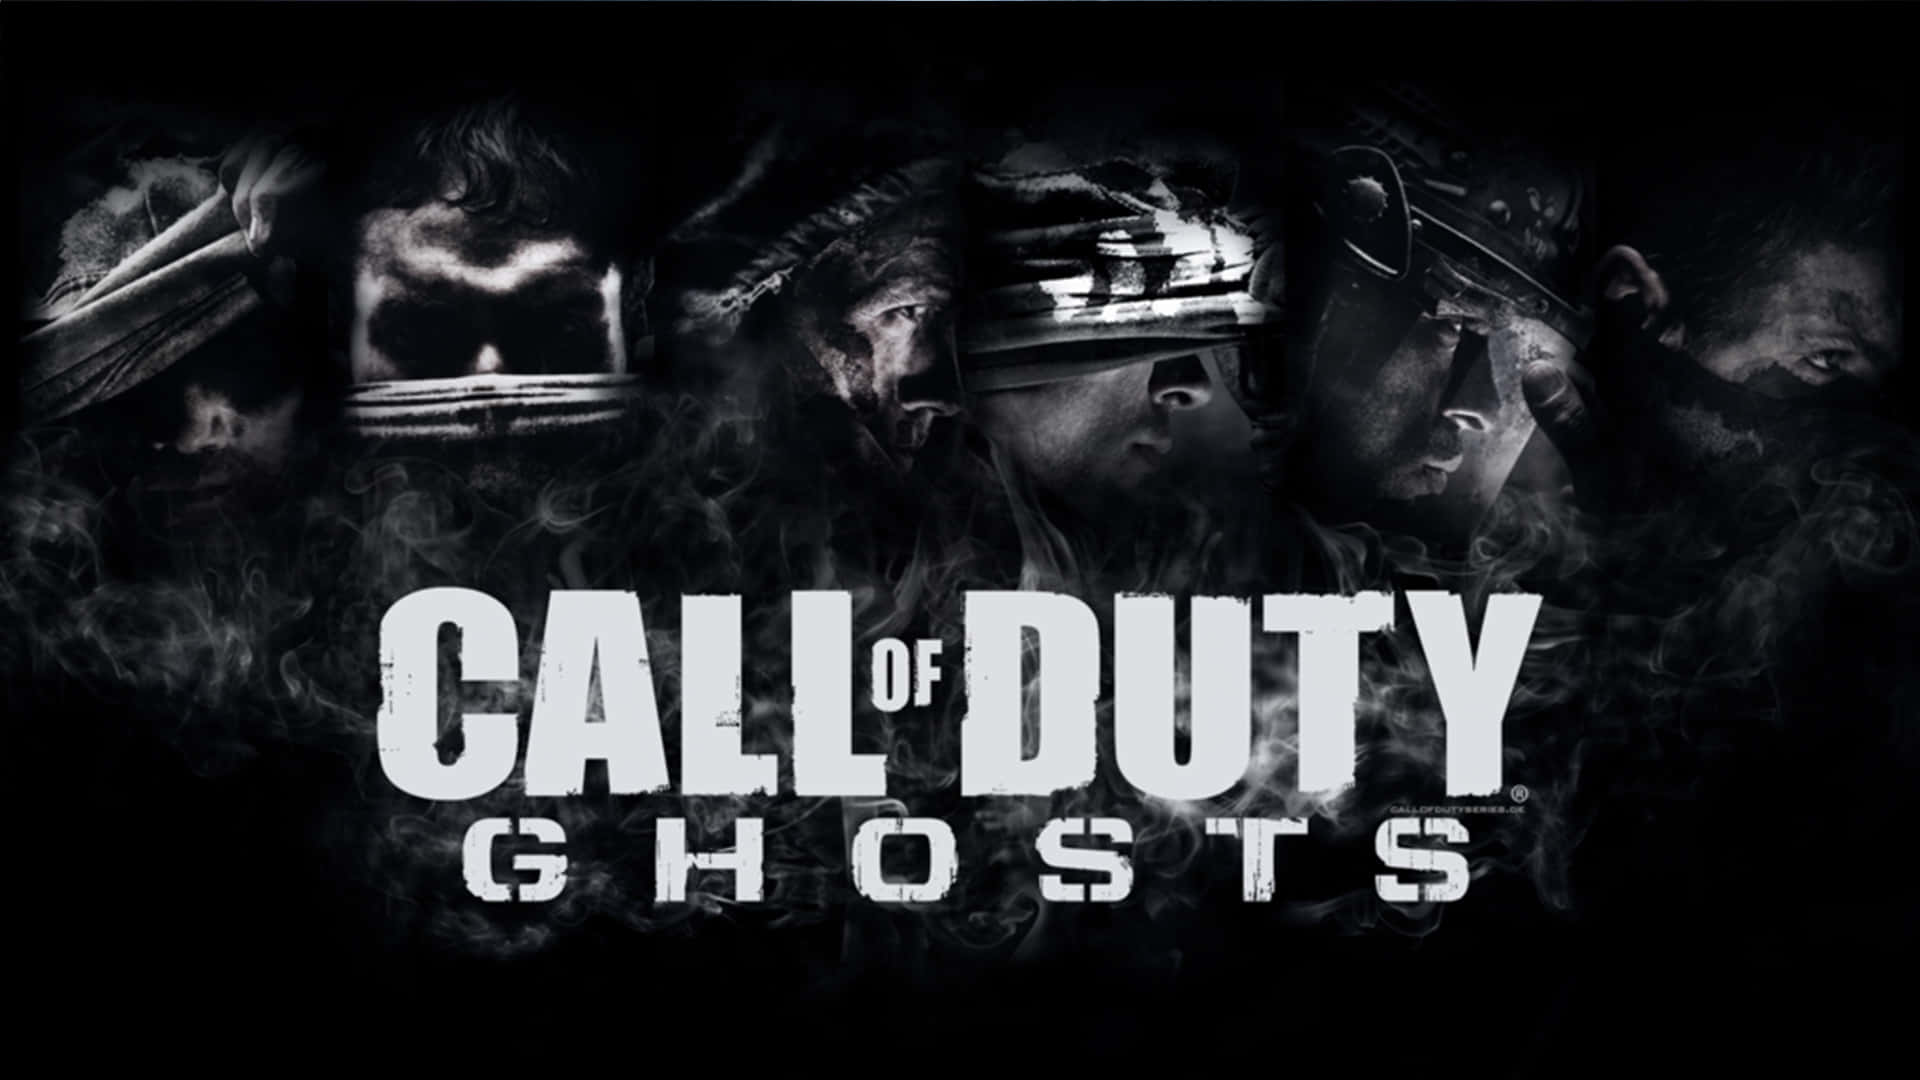 Intense Action in Call of Duty Ghosts Wallpaper